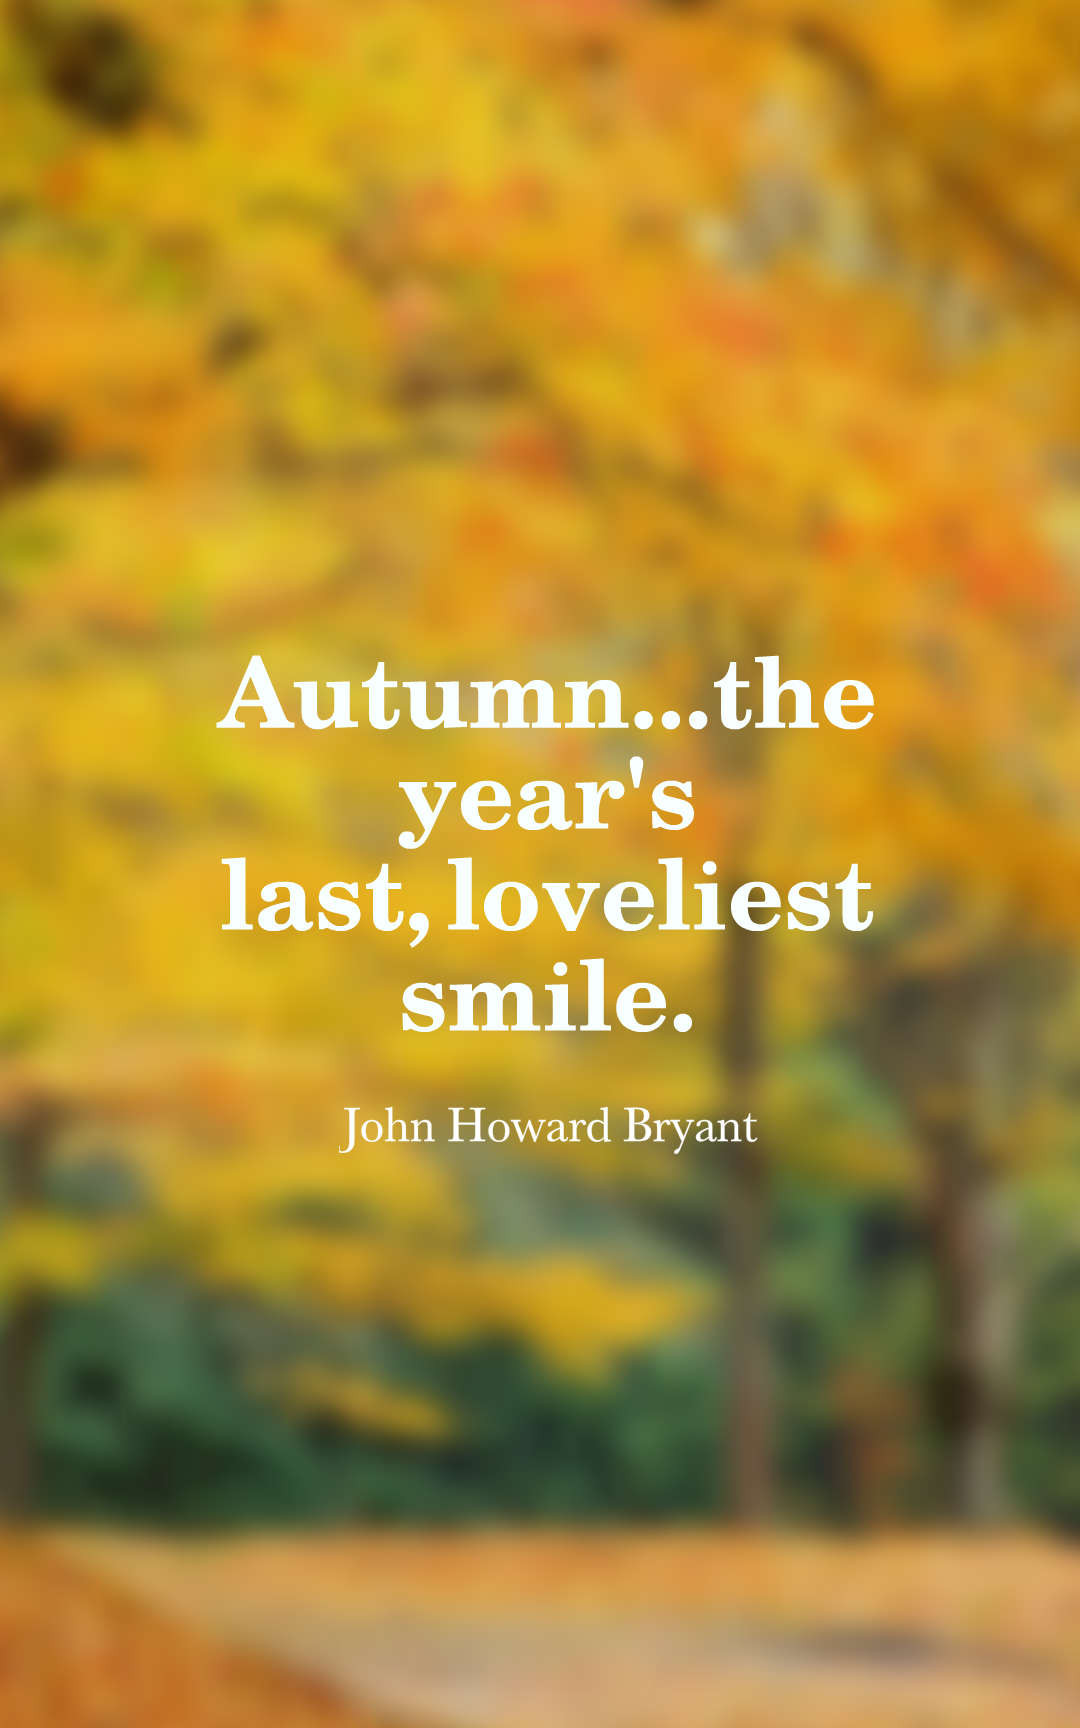 Inspirational Quote With Images
 32 Inspirational Autumn Quotes With